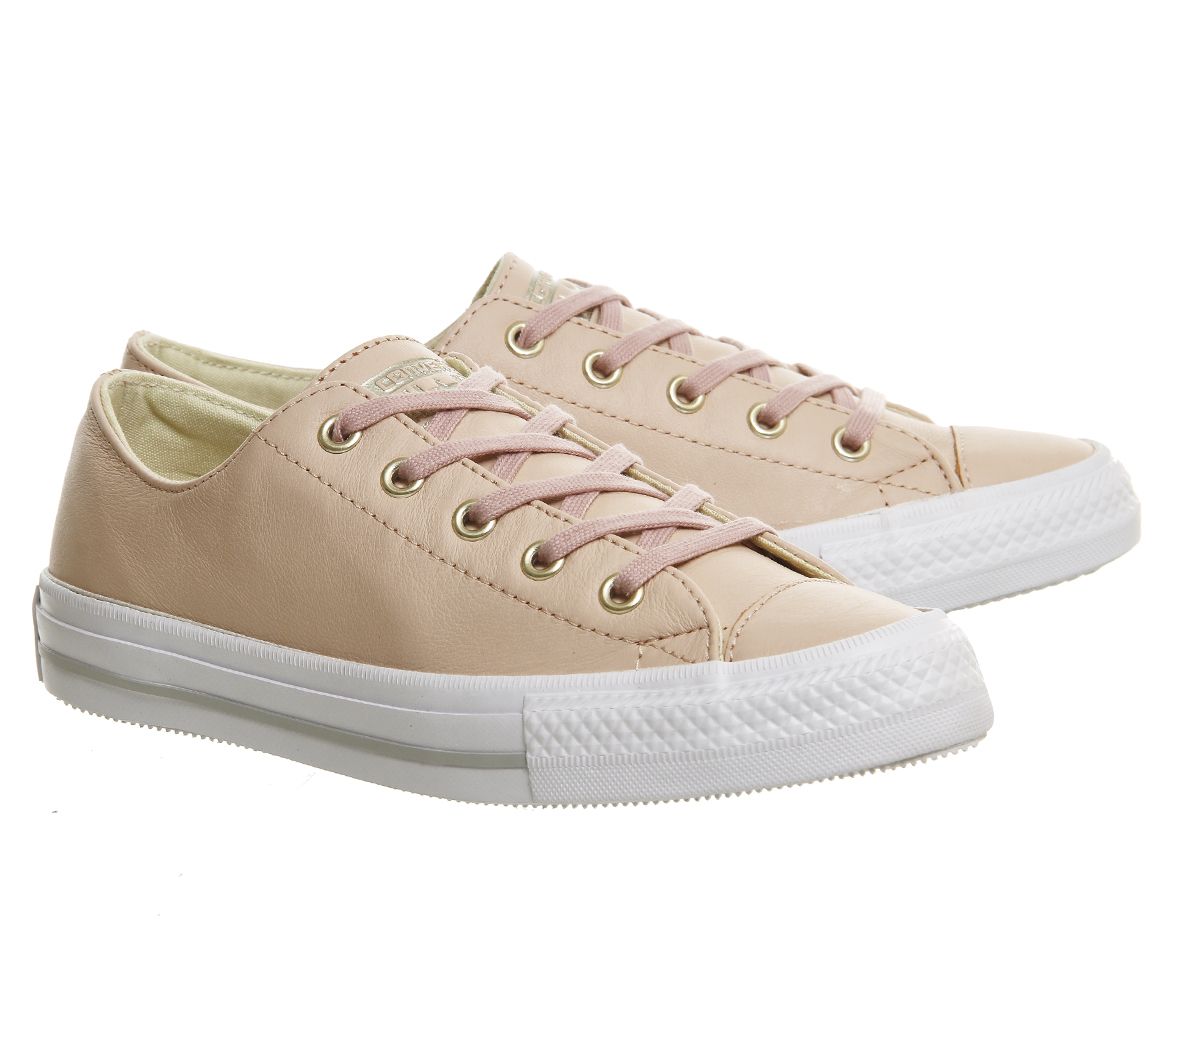 converse all star leather tan